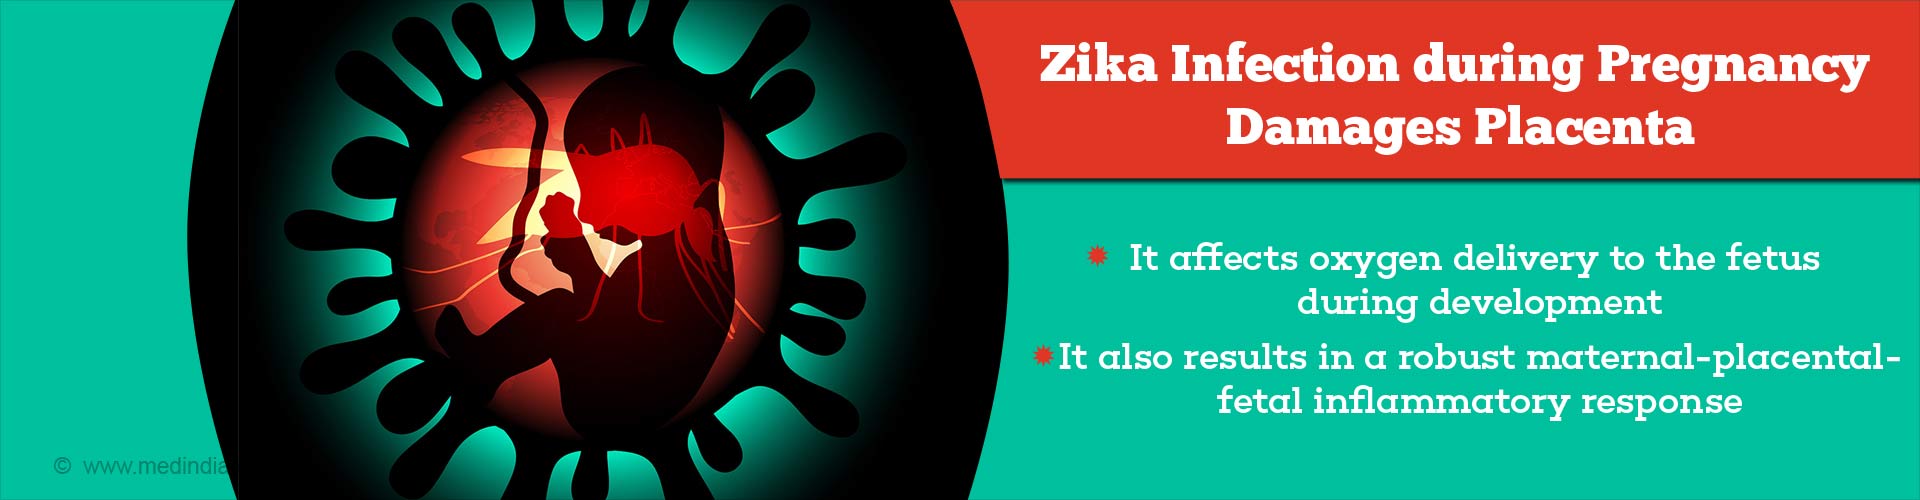 Zika Infection during Pregnancy Damages Placenta
- It affects oxygen delivery to the fetus during development
- It also results in a robust maternal-placental fetal inflammatory response

